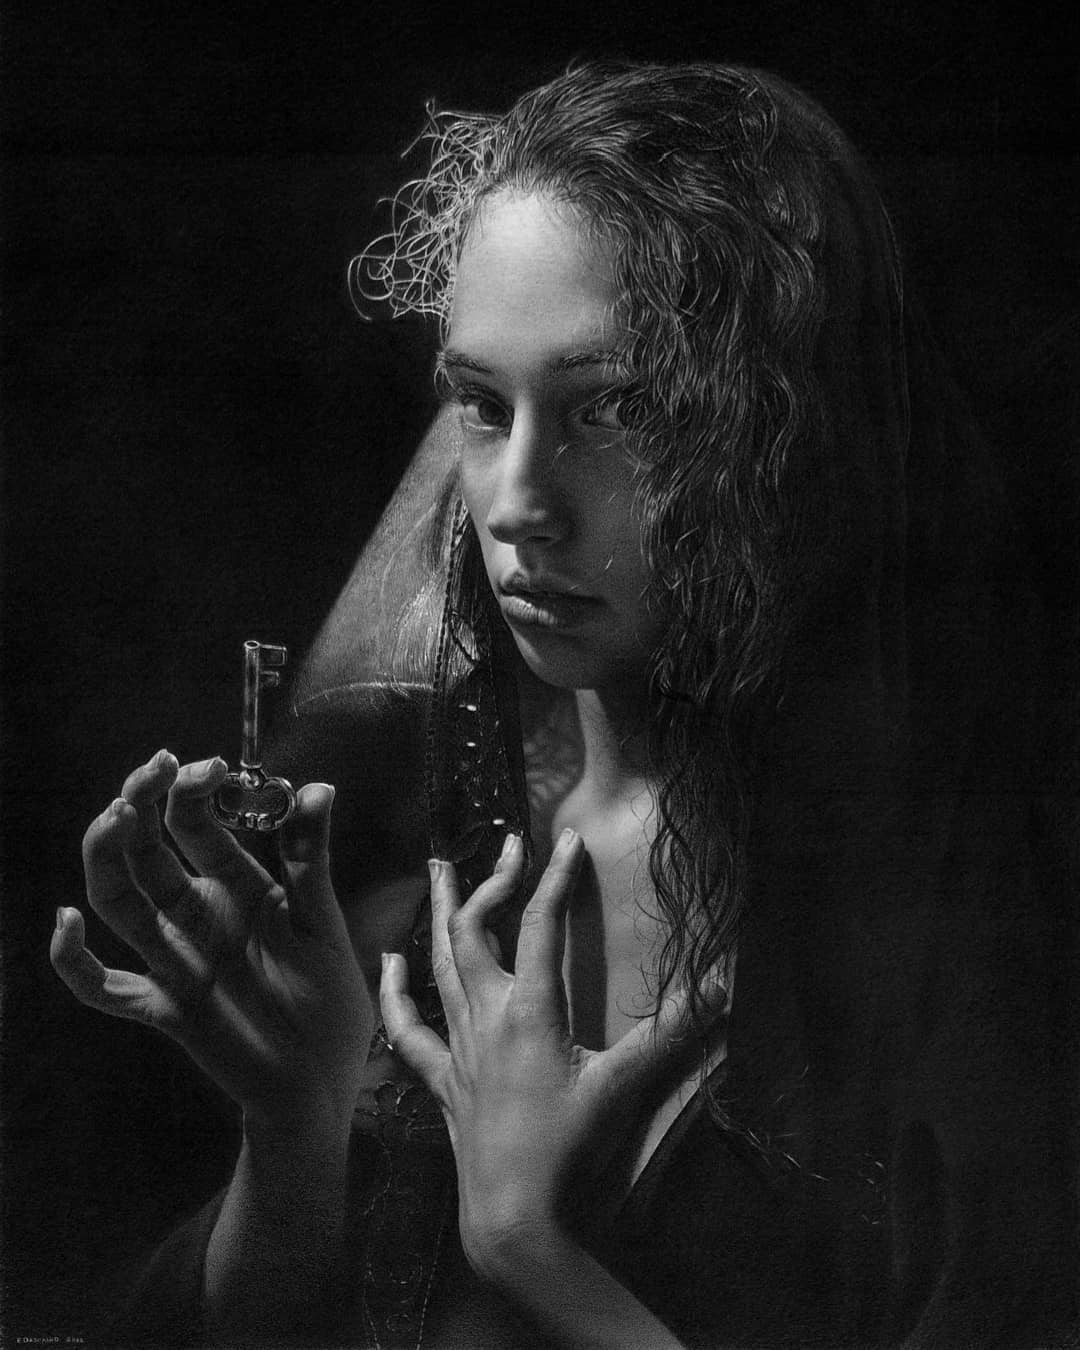 Hyper Realistic Pencil And Charcoal Portraits By Emanuele Dascanio 8